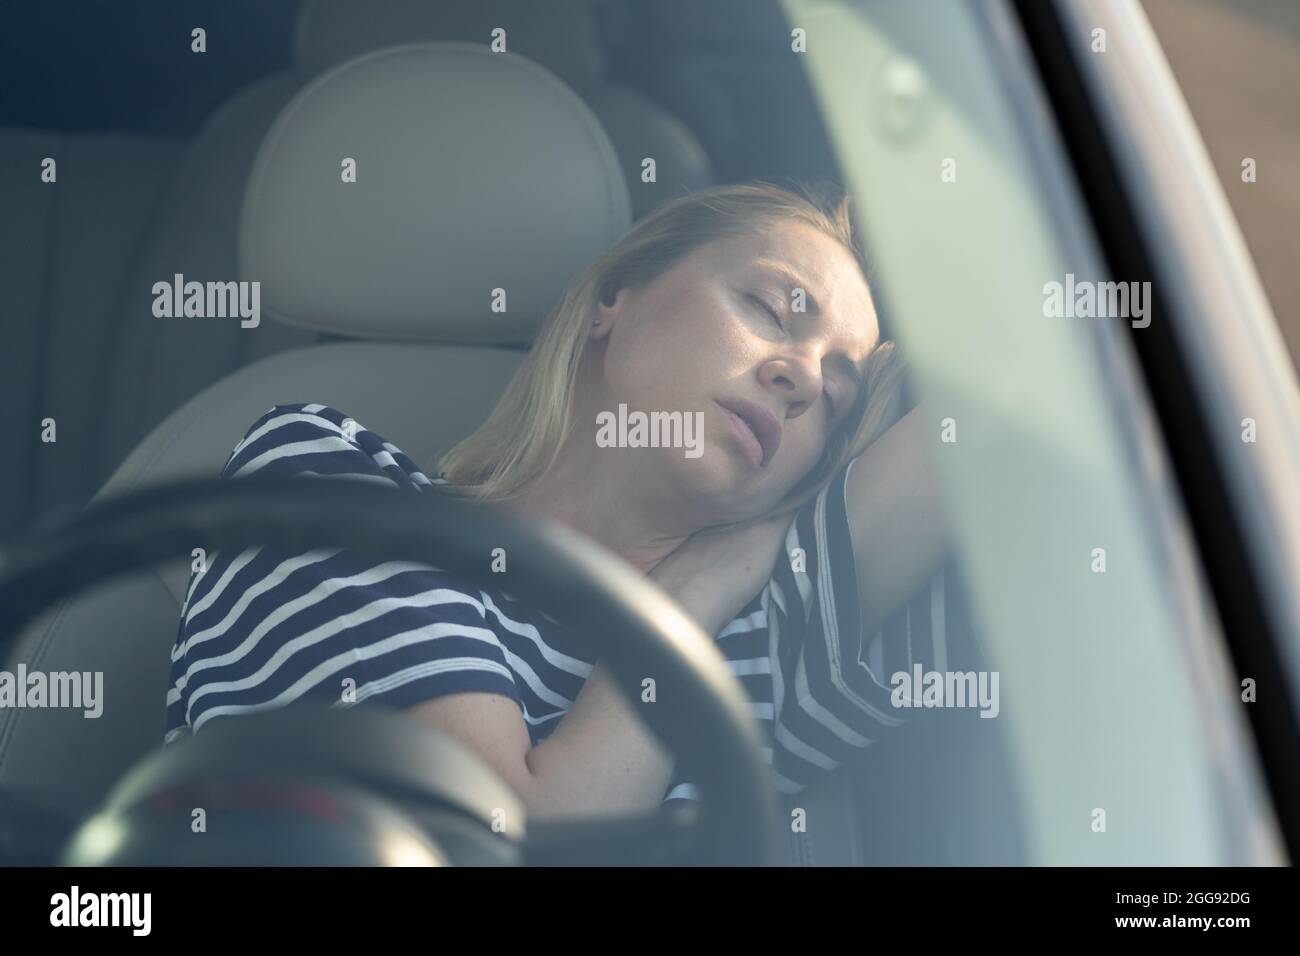 Woman tired of driving sleep on front seat. Female travel by car on road trip resting napping inside Stock Photo